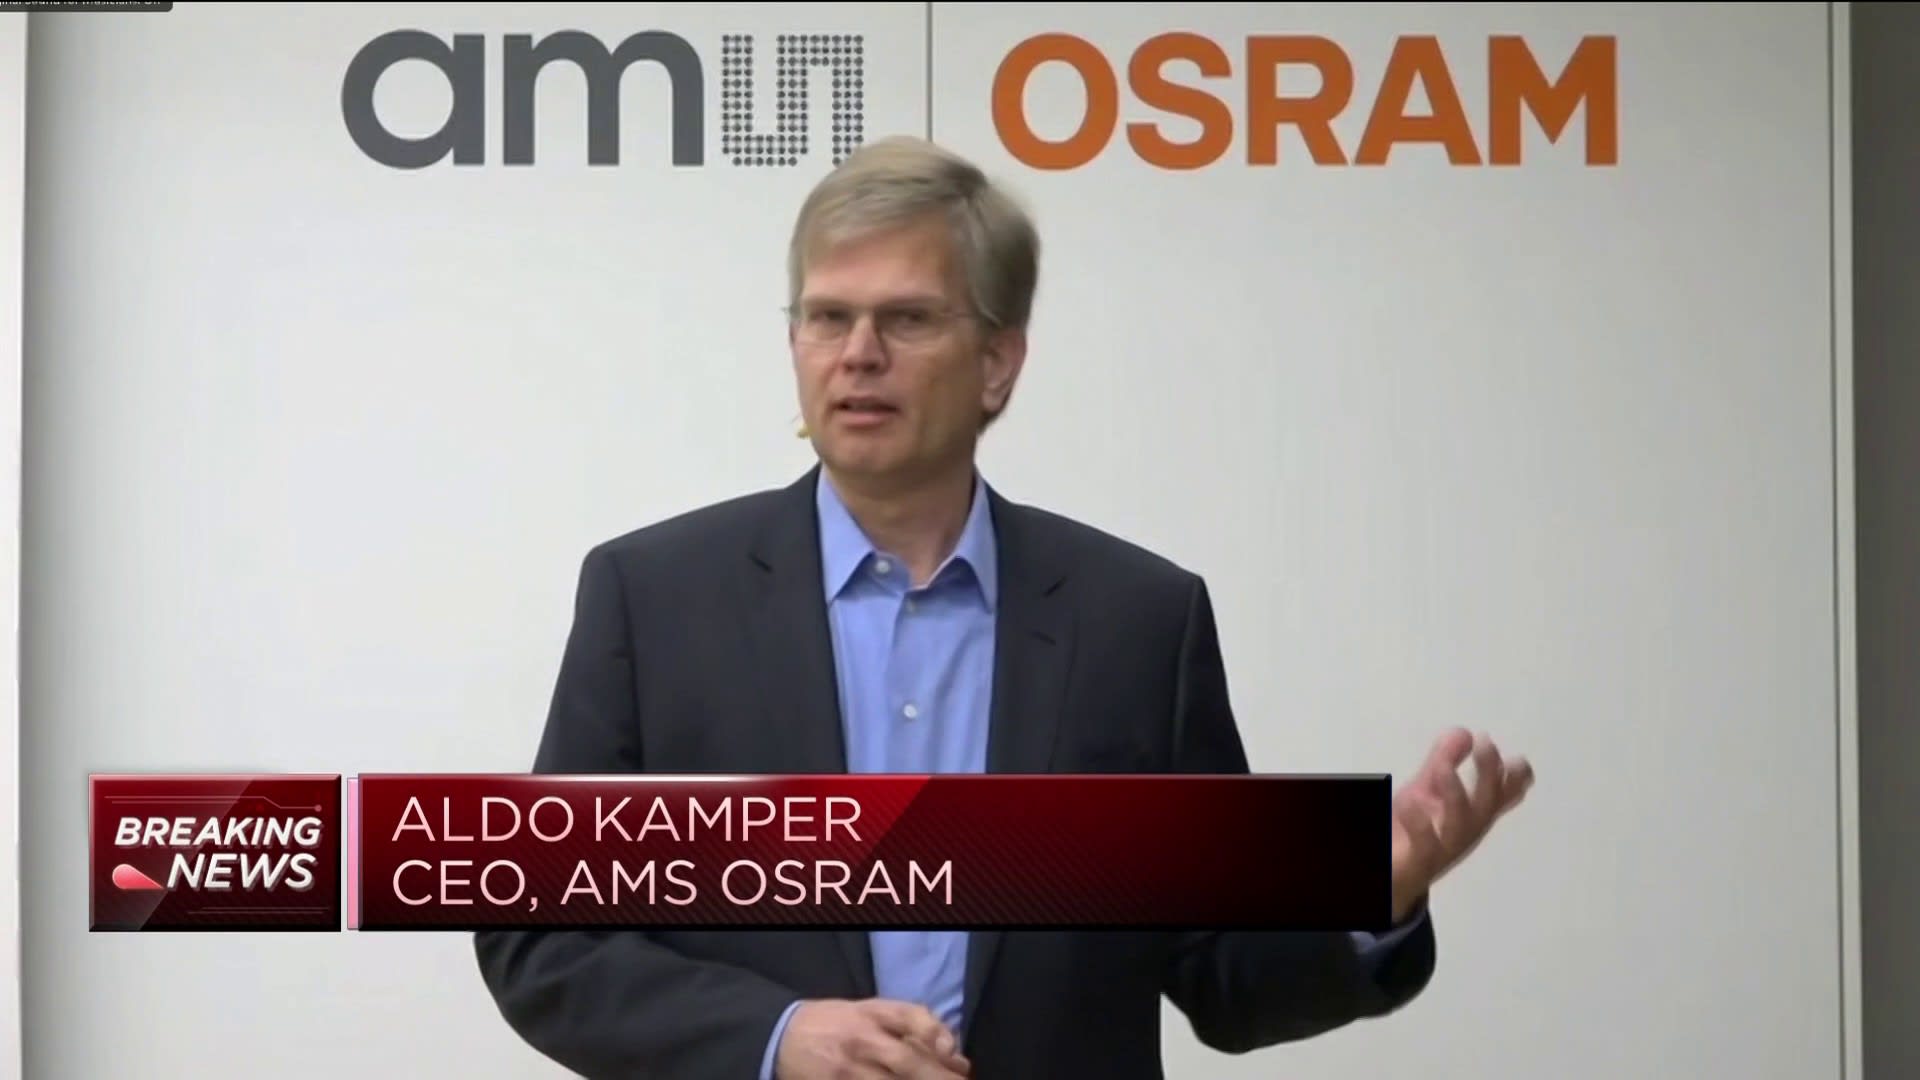 Solid start of the year for the AMS Osram business, says company CEO Aldo Kamper [Video]